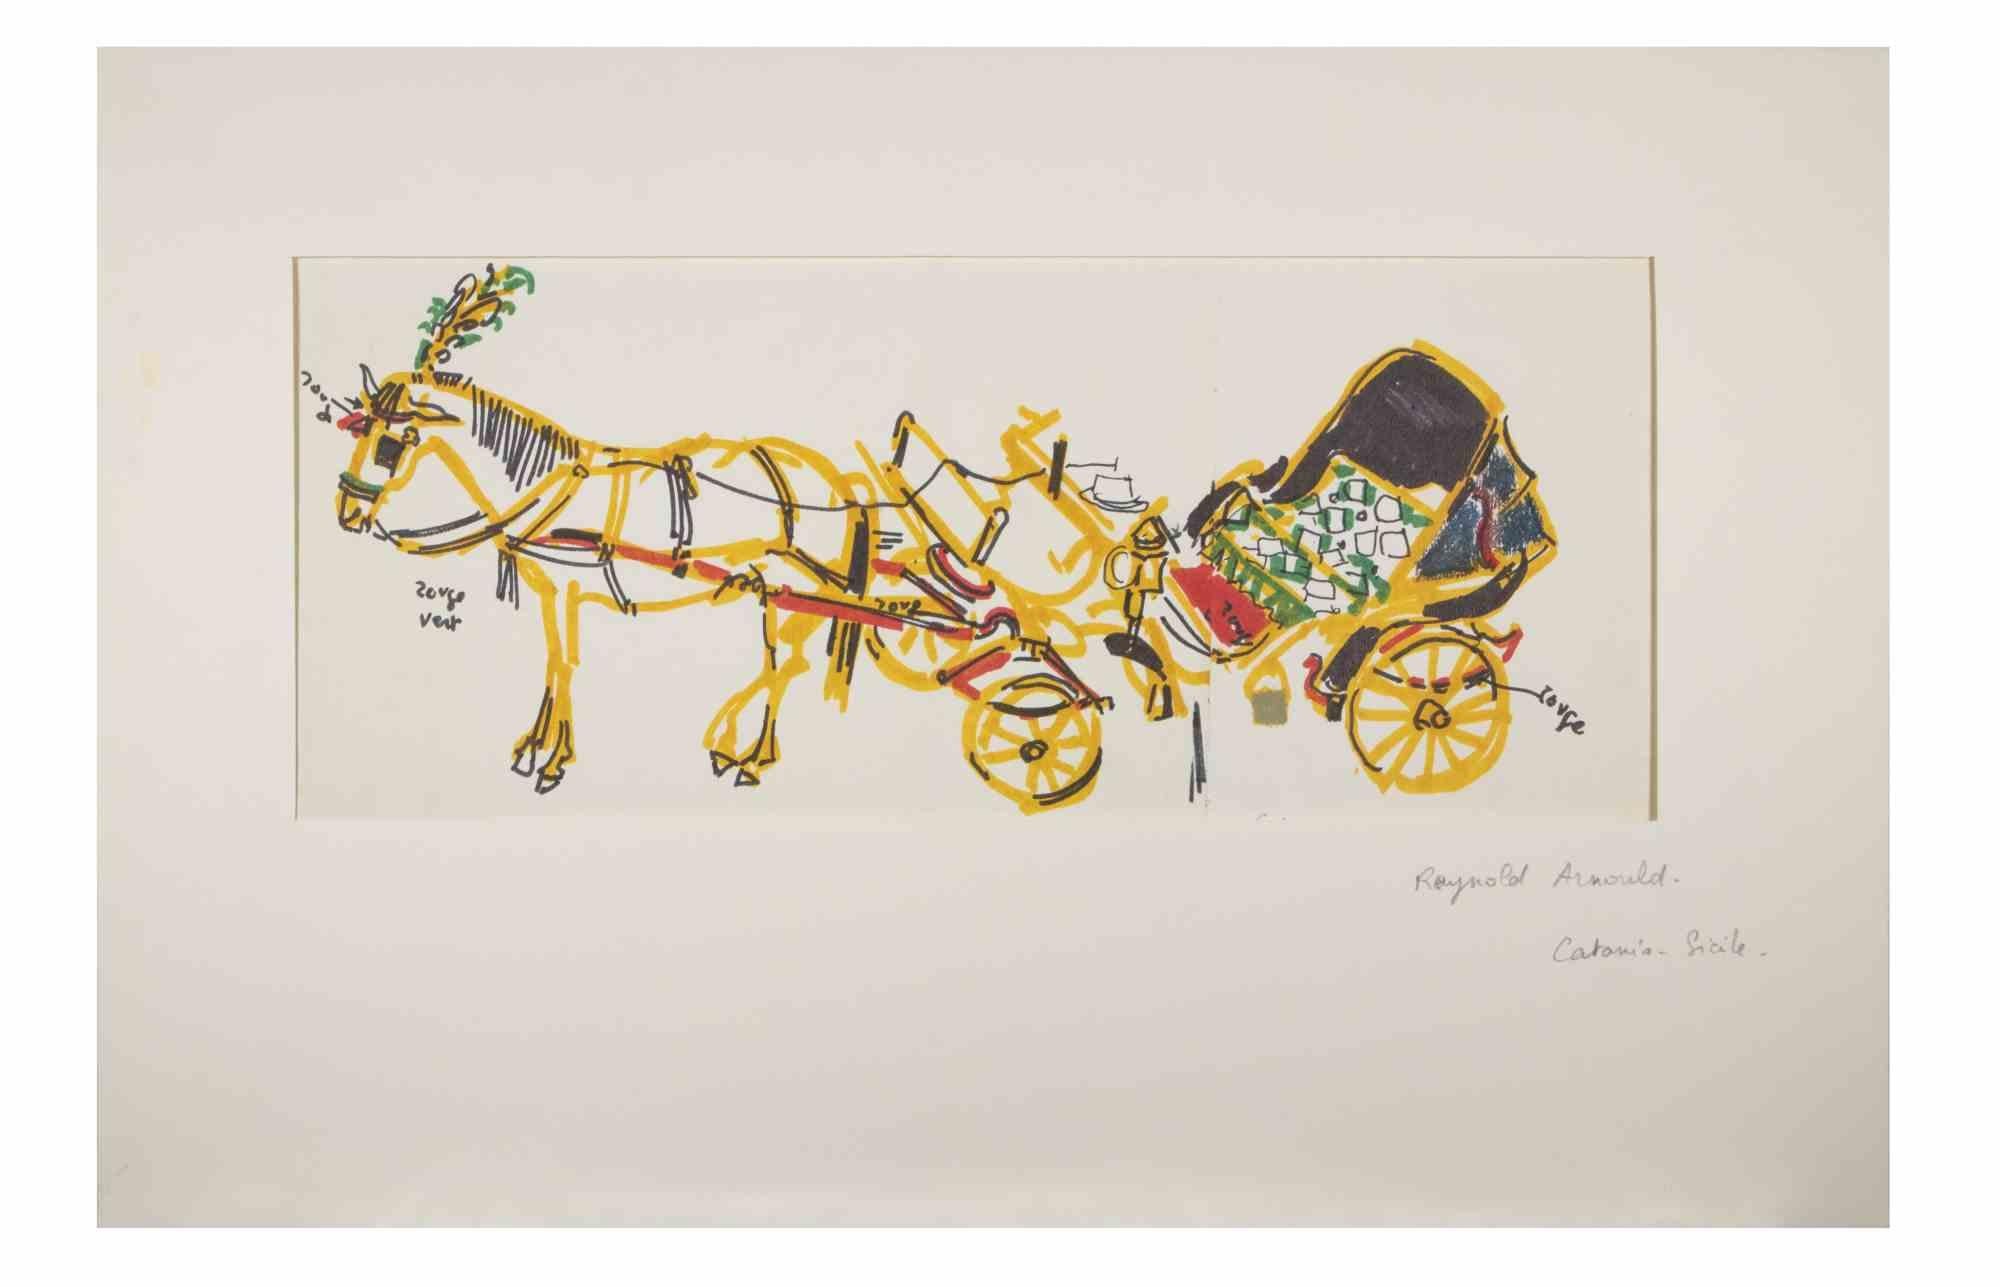 Sicilian Cart is a Watercolour  and Pastel Drawing realized by Reynold Arnould  (Le Havre 1919 - Parigi 1980).

Good condition included a white cardboard passpartout (32.5x49 cm).

no signature, dated on the lower right corner.

Reynold Arnould was